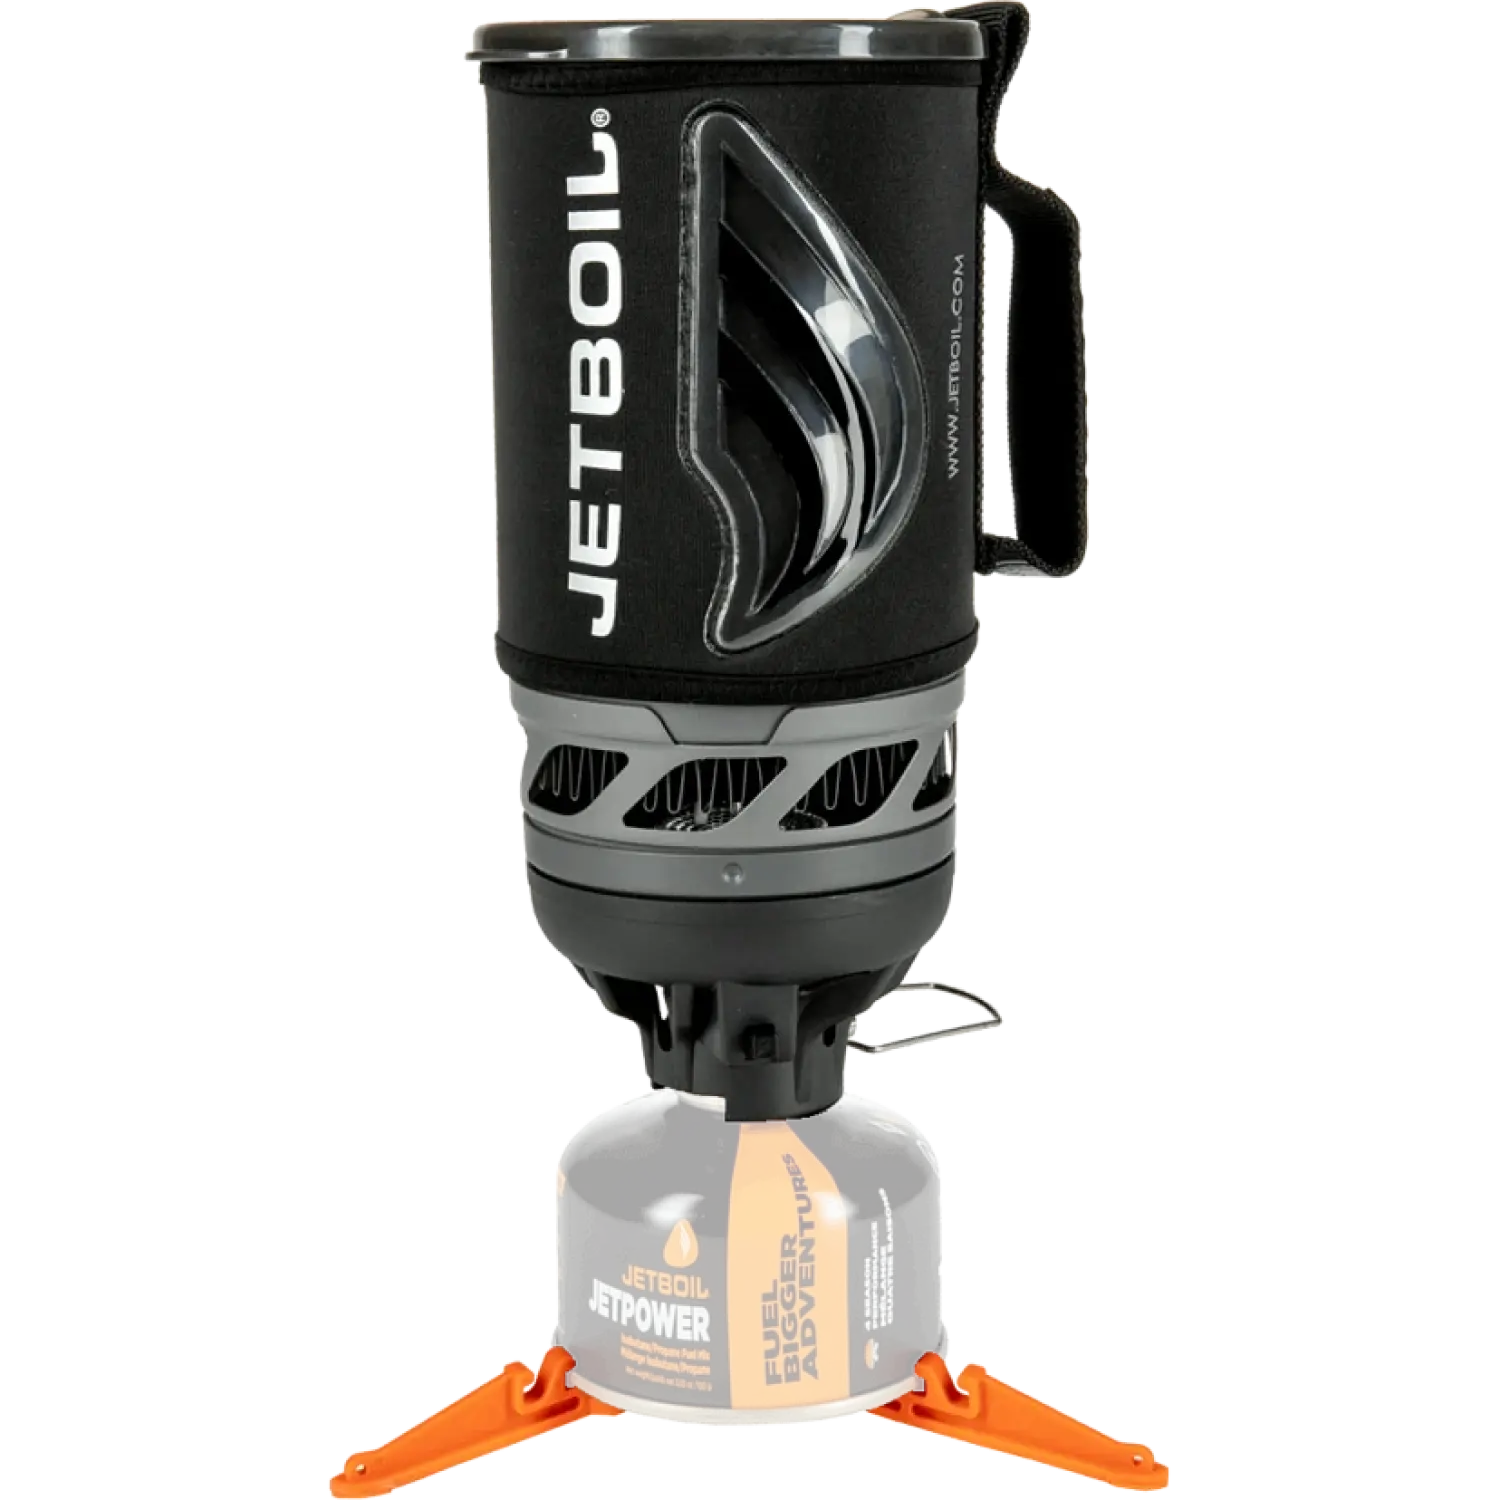 Jetboil Flash Cooking System  shown with base. (Fuel canister not included)